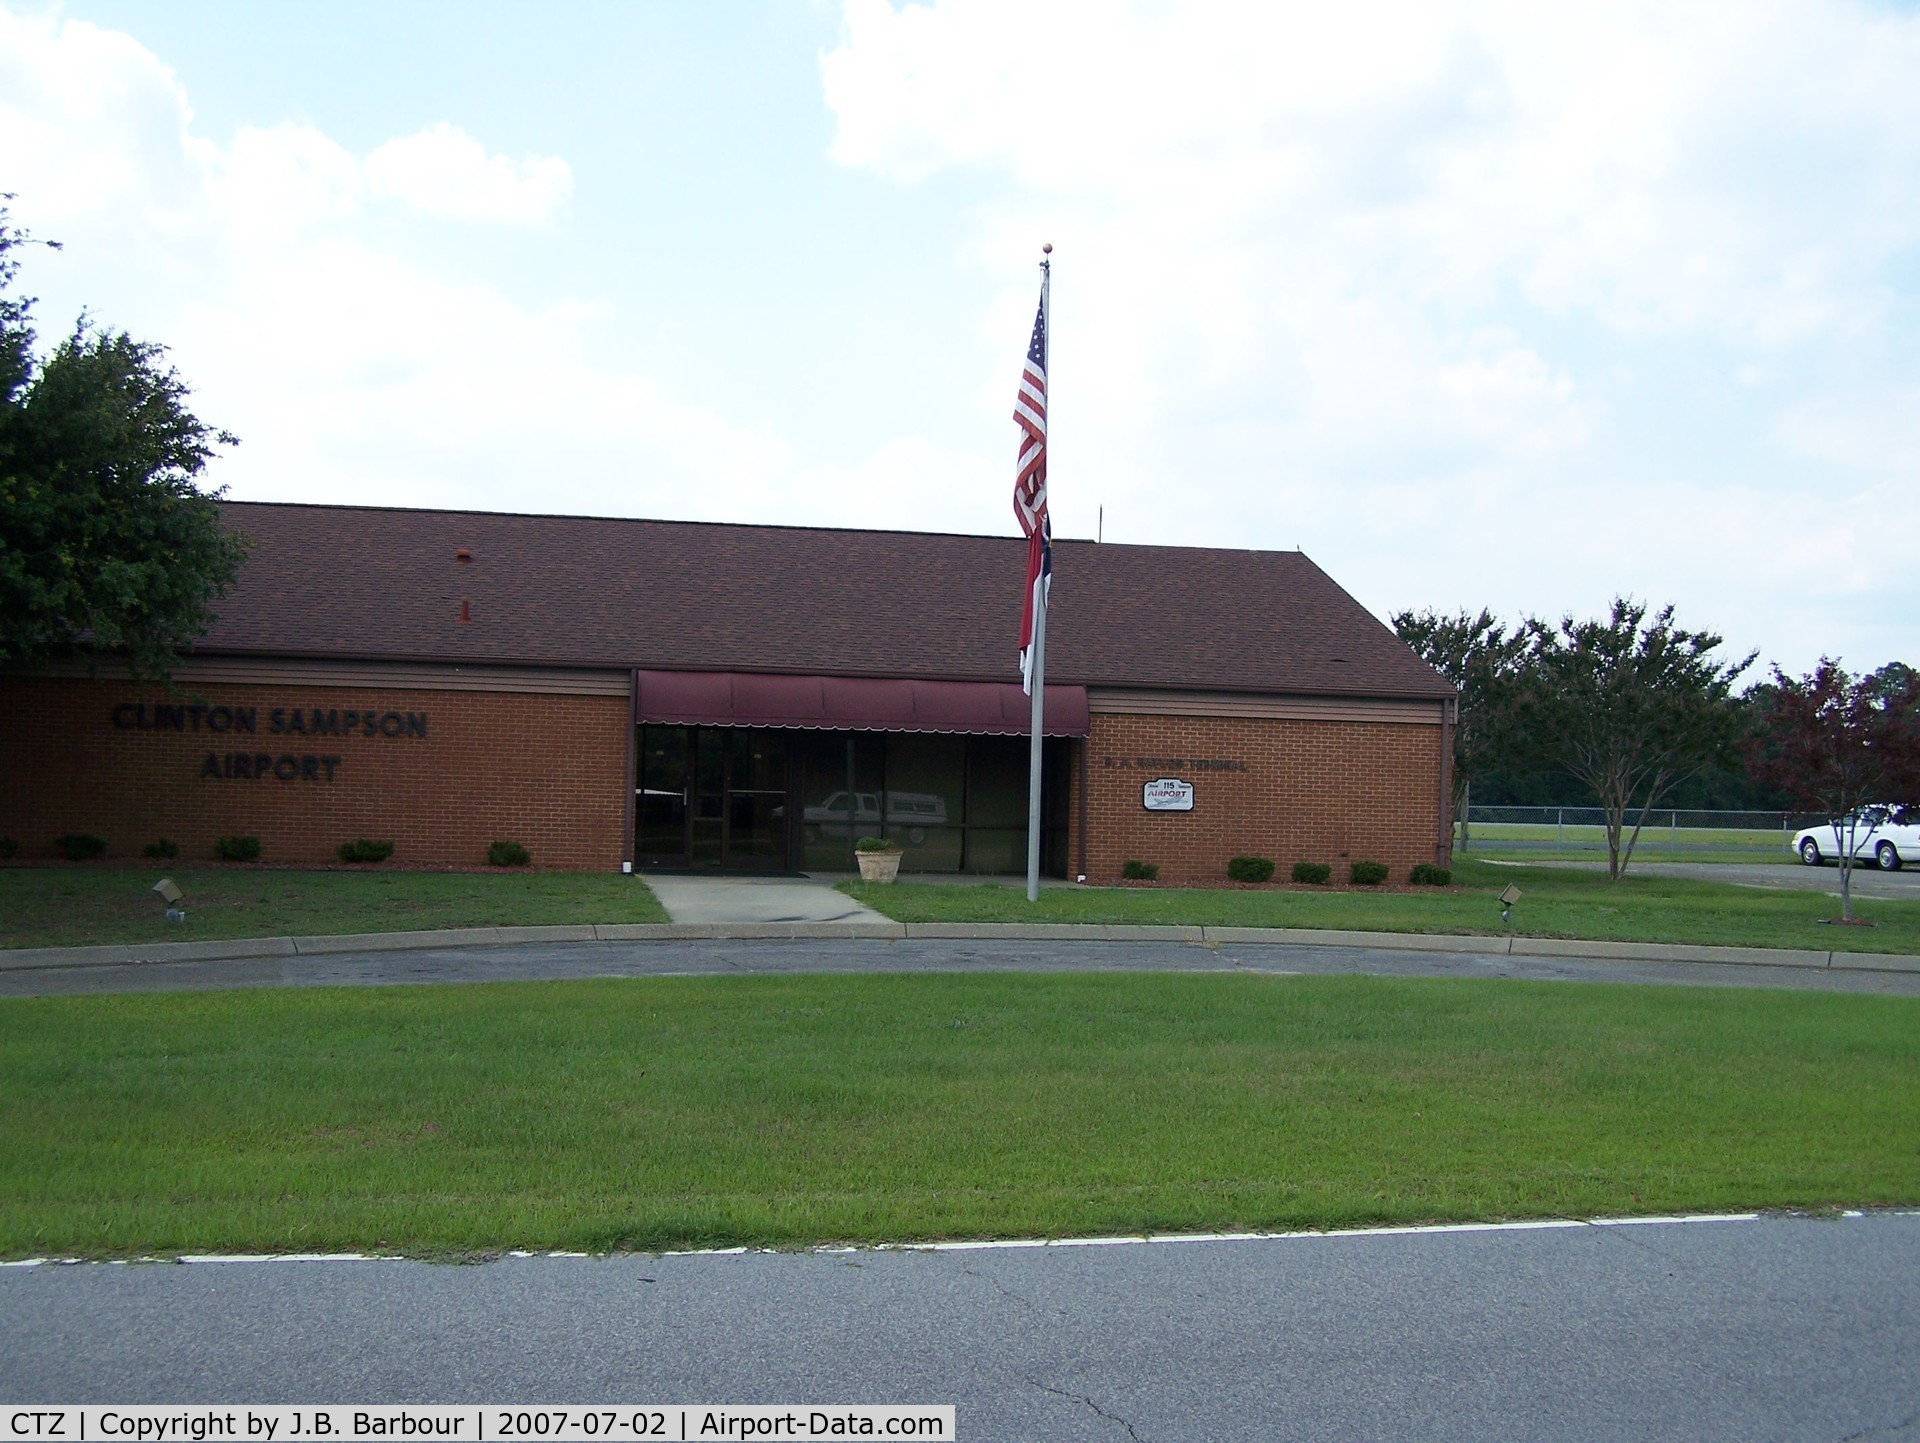 Clinton-sampson County Airport (CTZ) - A clean facility, the staff wasn't on hand for comment